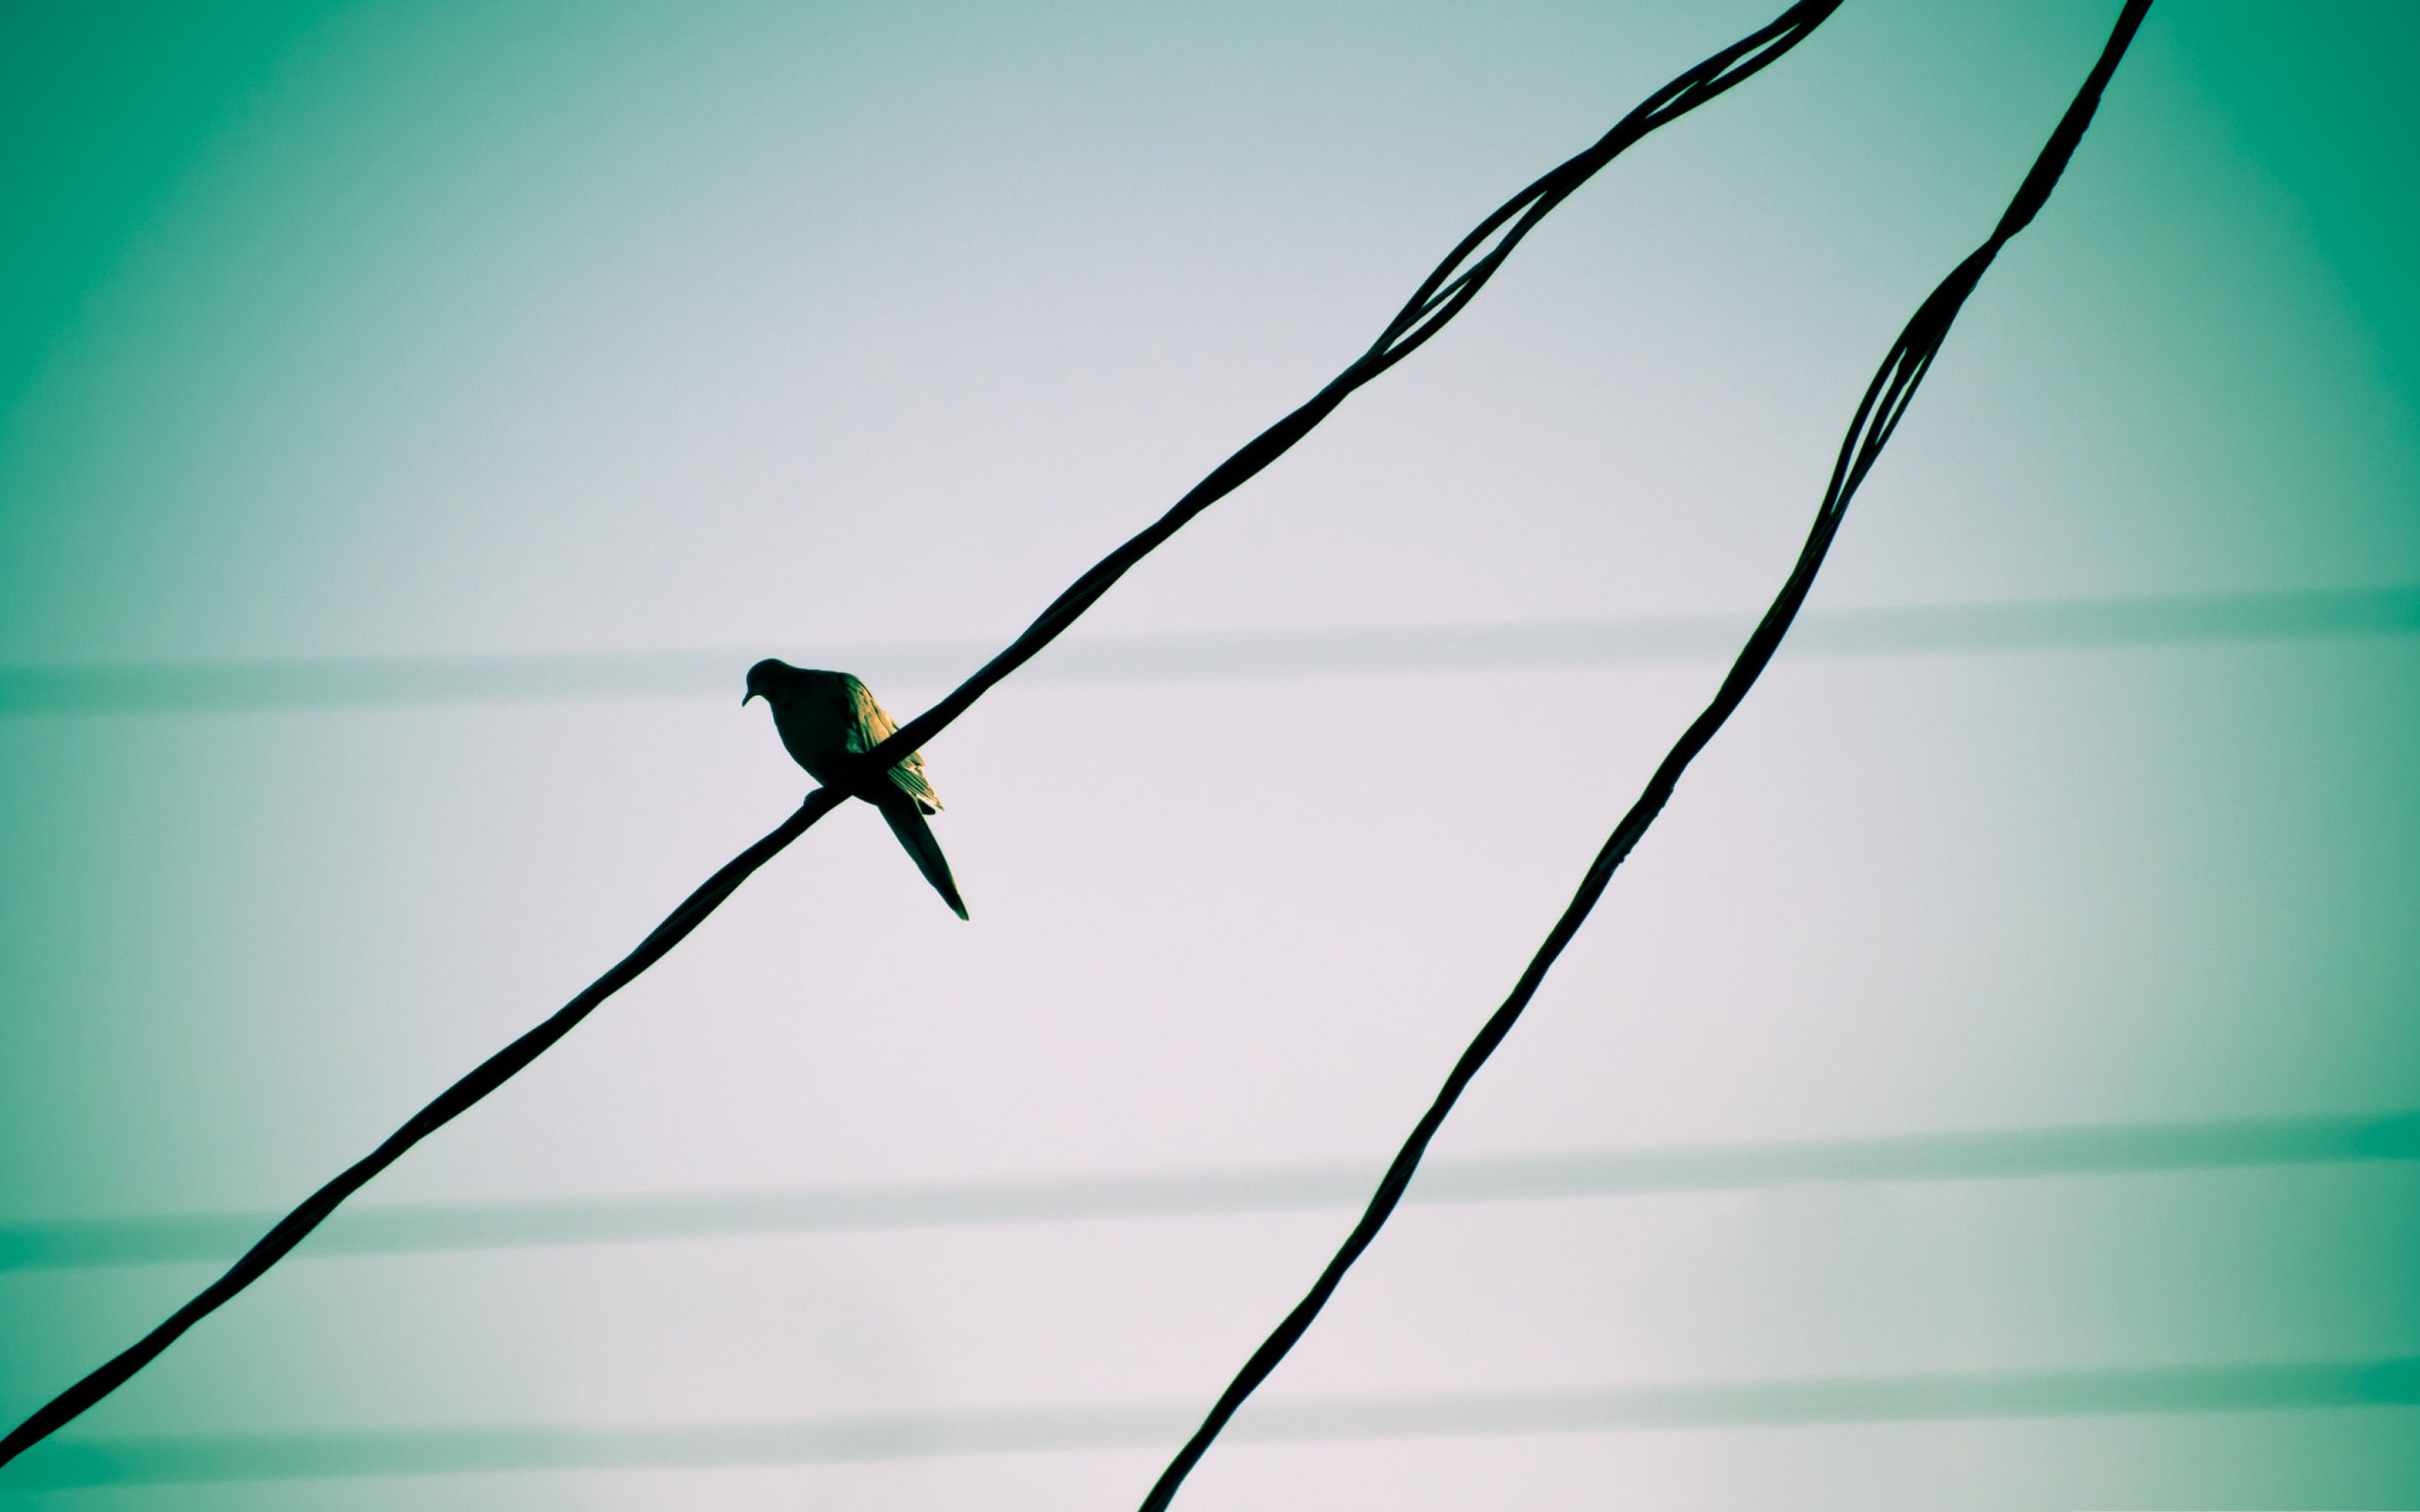 Pigeon On Wire wallpaper 2560x1600